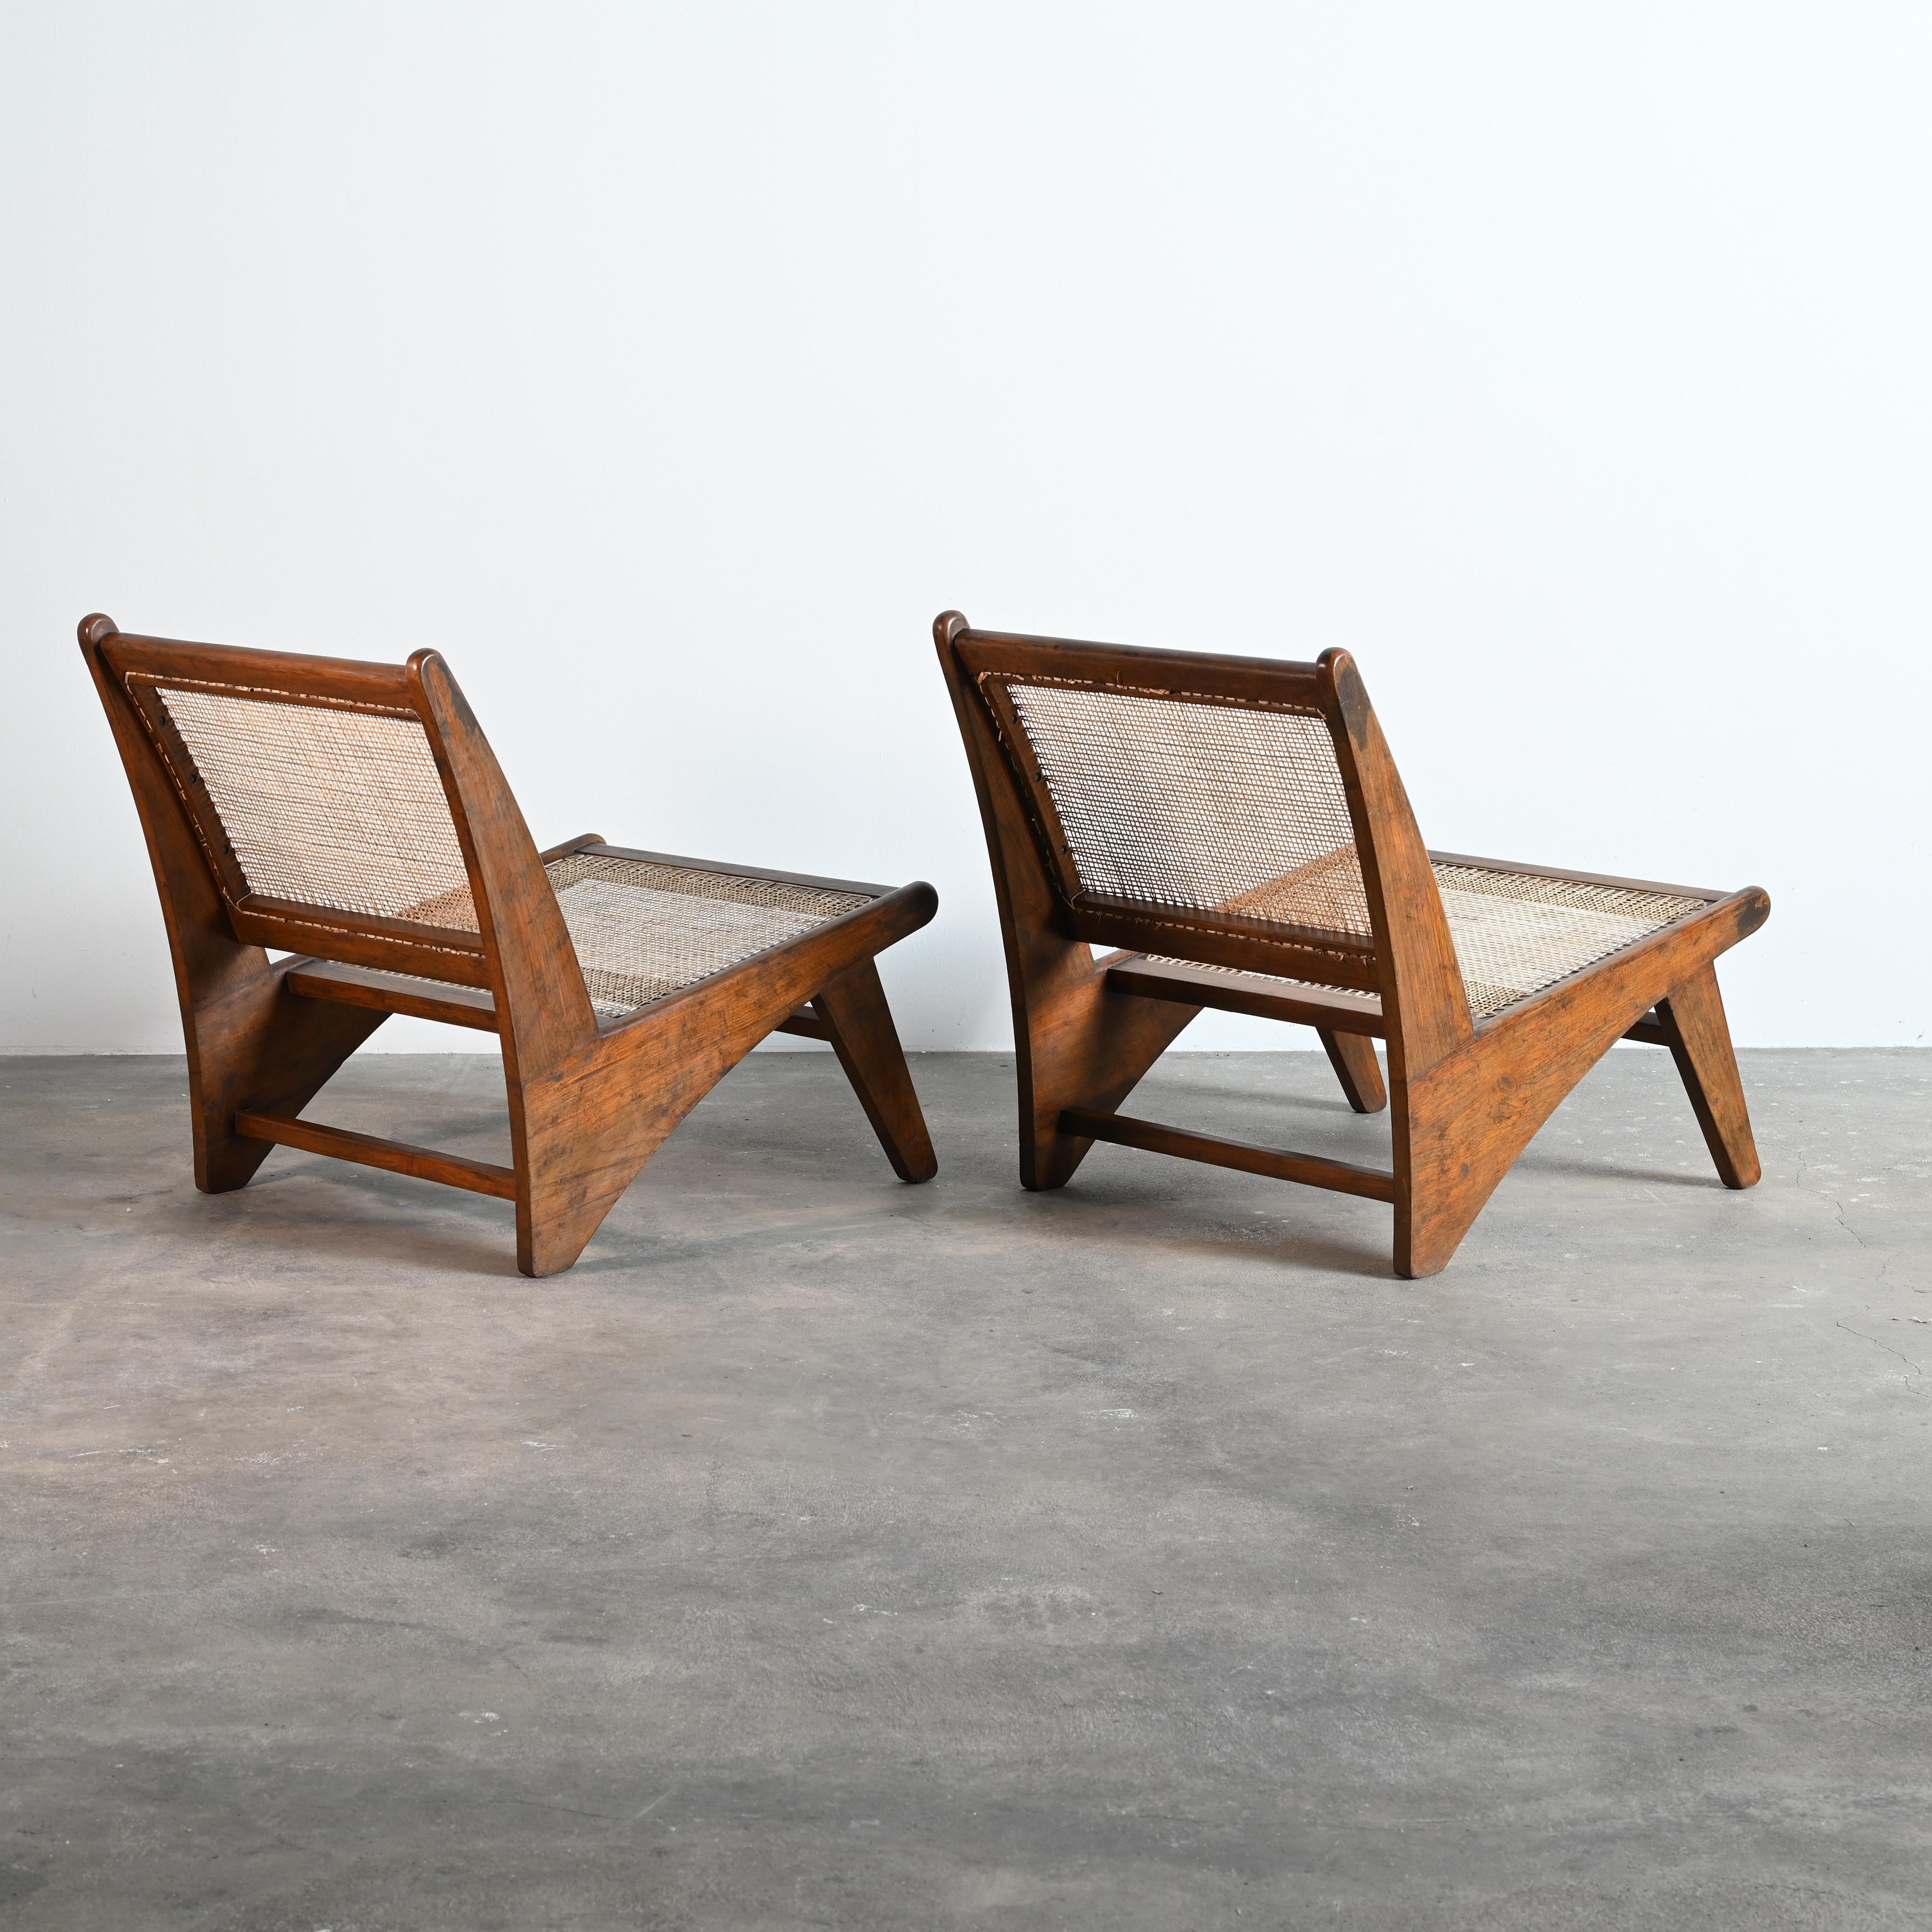 Indian Pierre Jeanneret PJ-SI-60-A Pair of Lounge Chairs / Authentic Mid-Century Modern For Sale